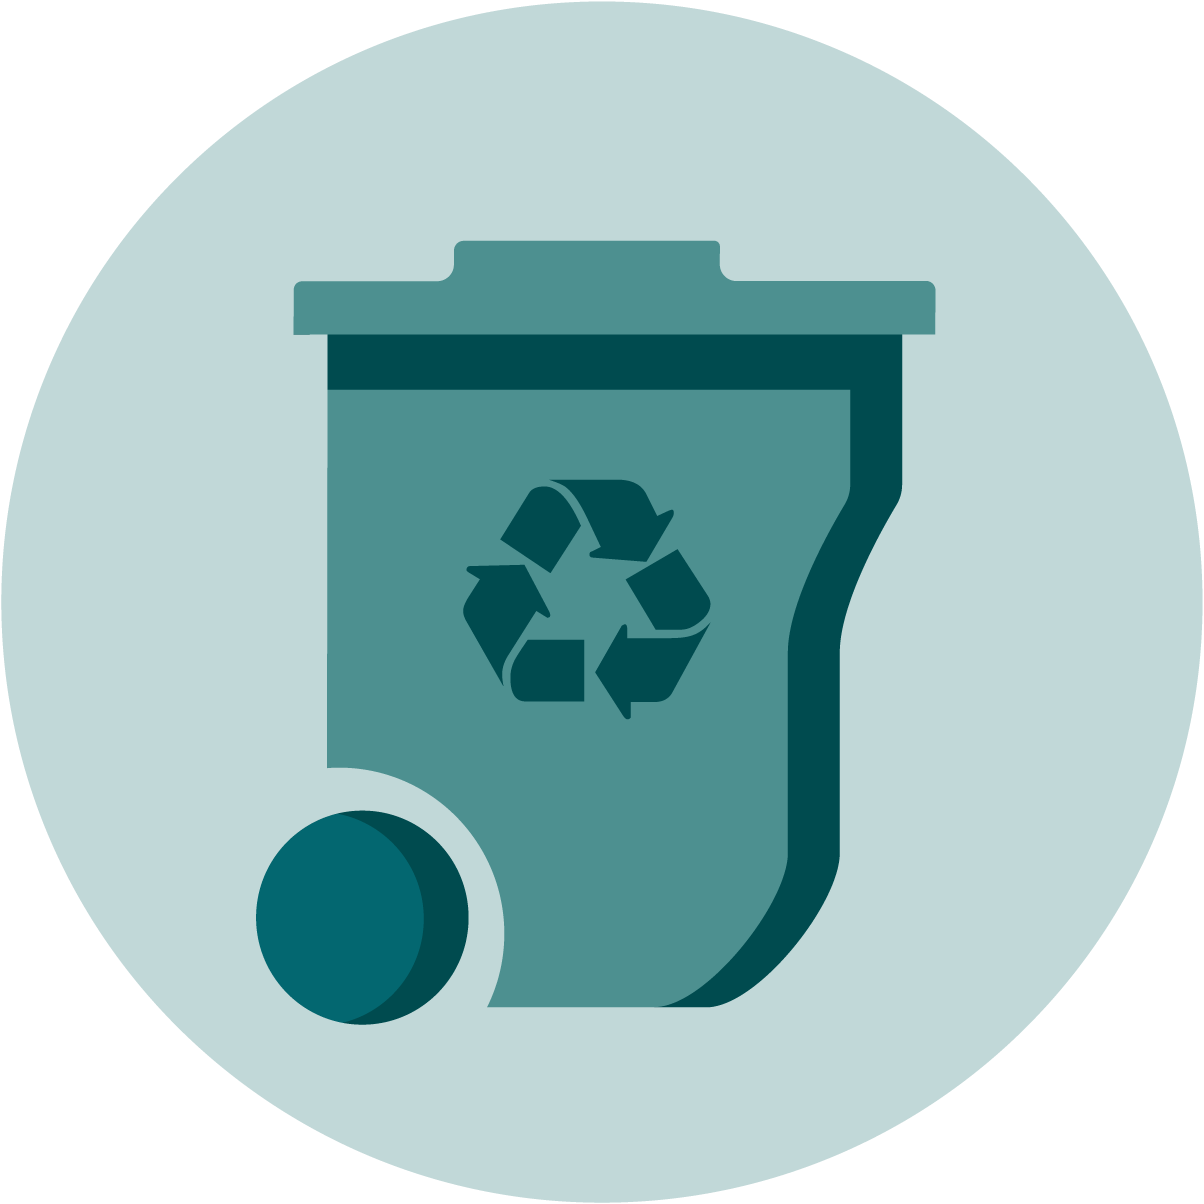 Improving Residential Recycling Programs in the U.S. - Blog